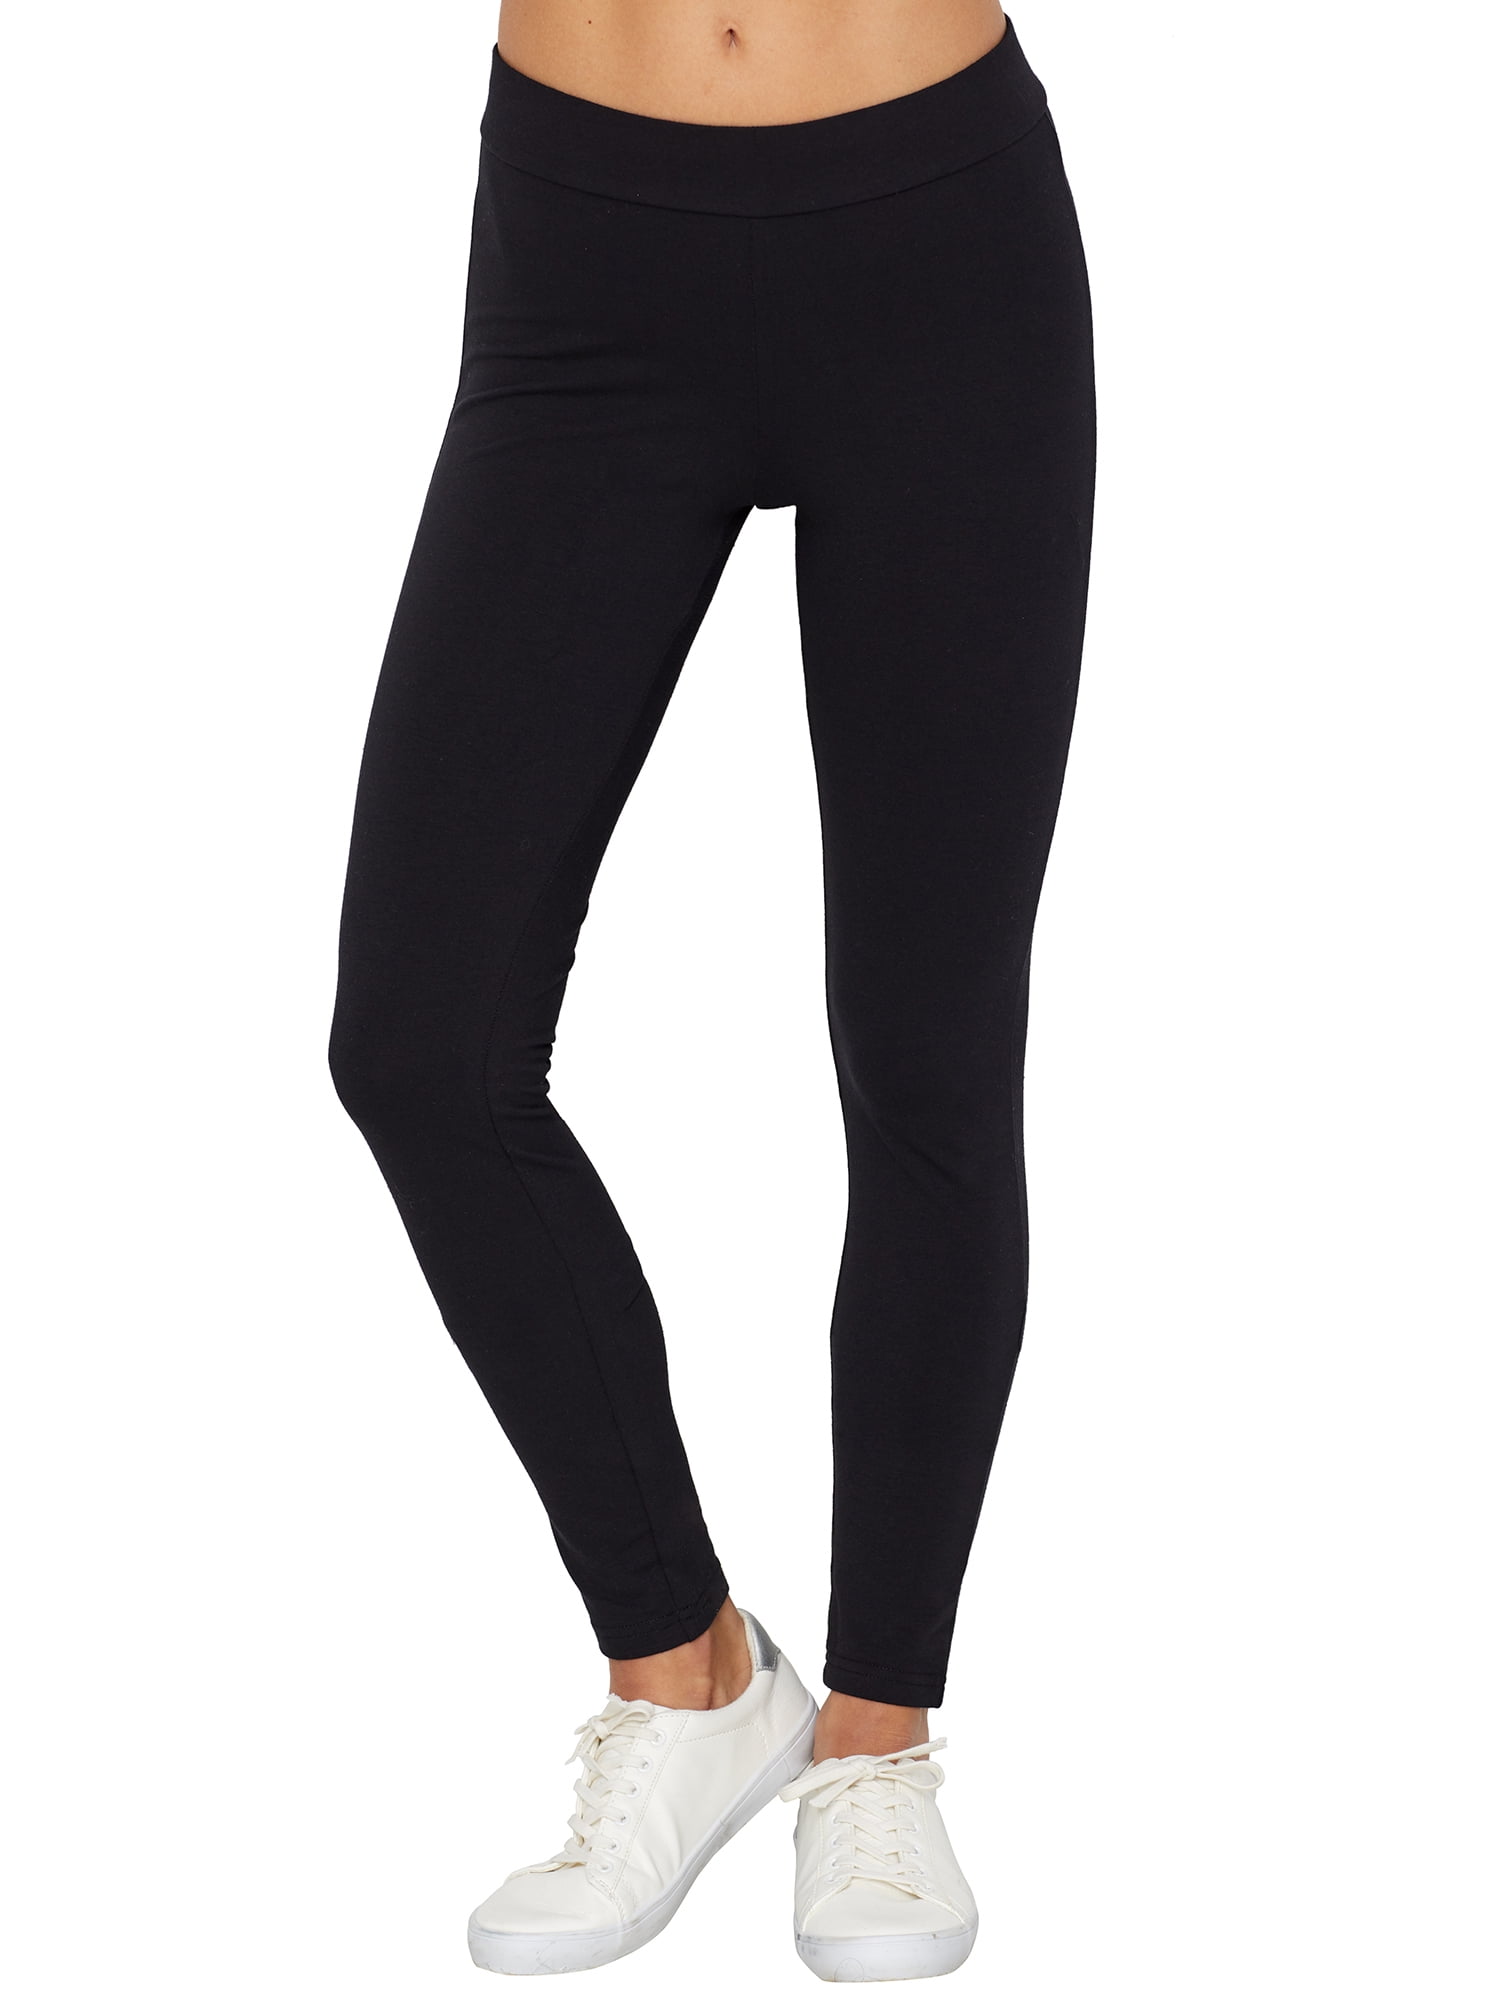 4XL Extra Wide Compression Leggings for Women 20-30mmHg